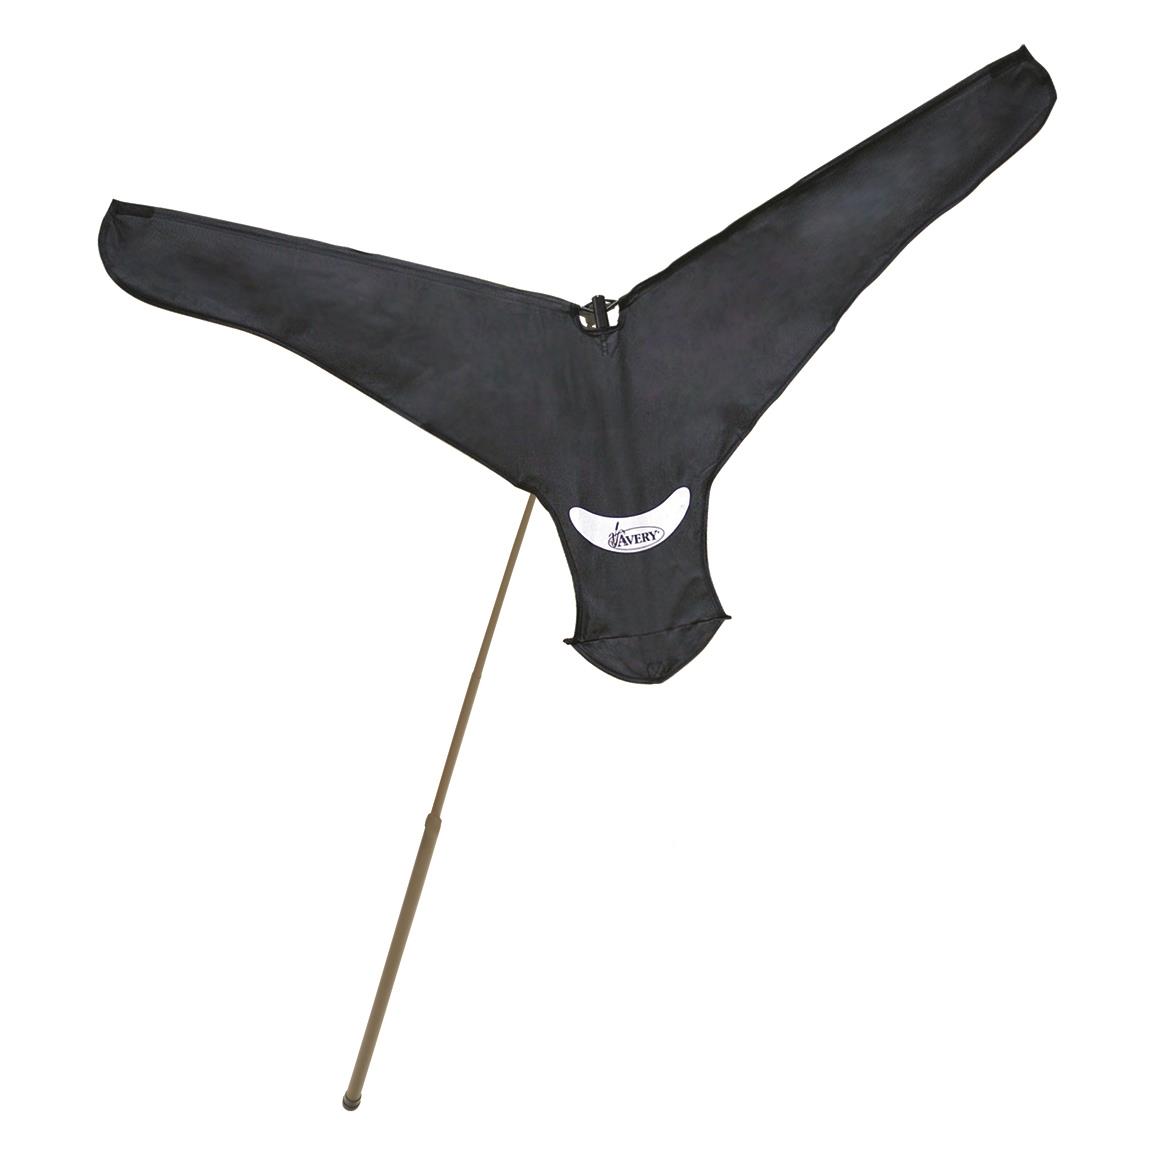 Avery GHG Extendable Pole with Flag, Canada Goose